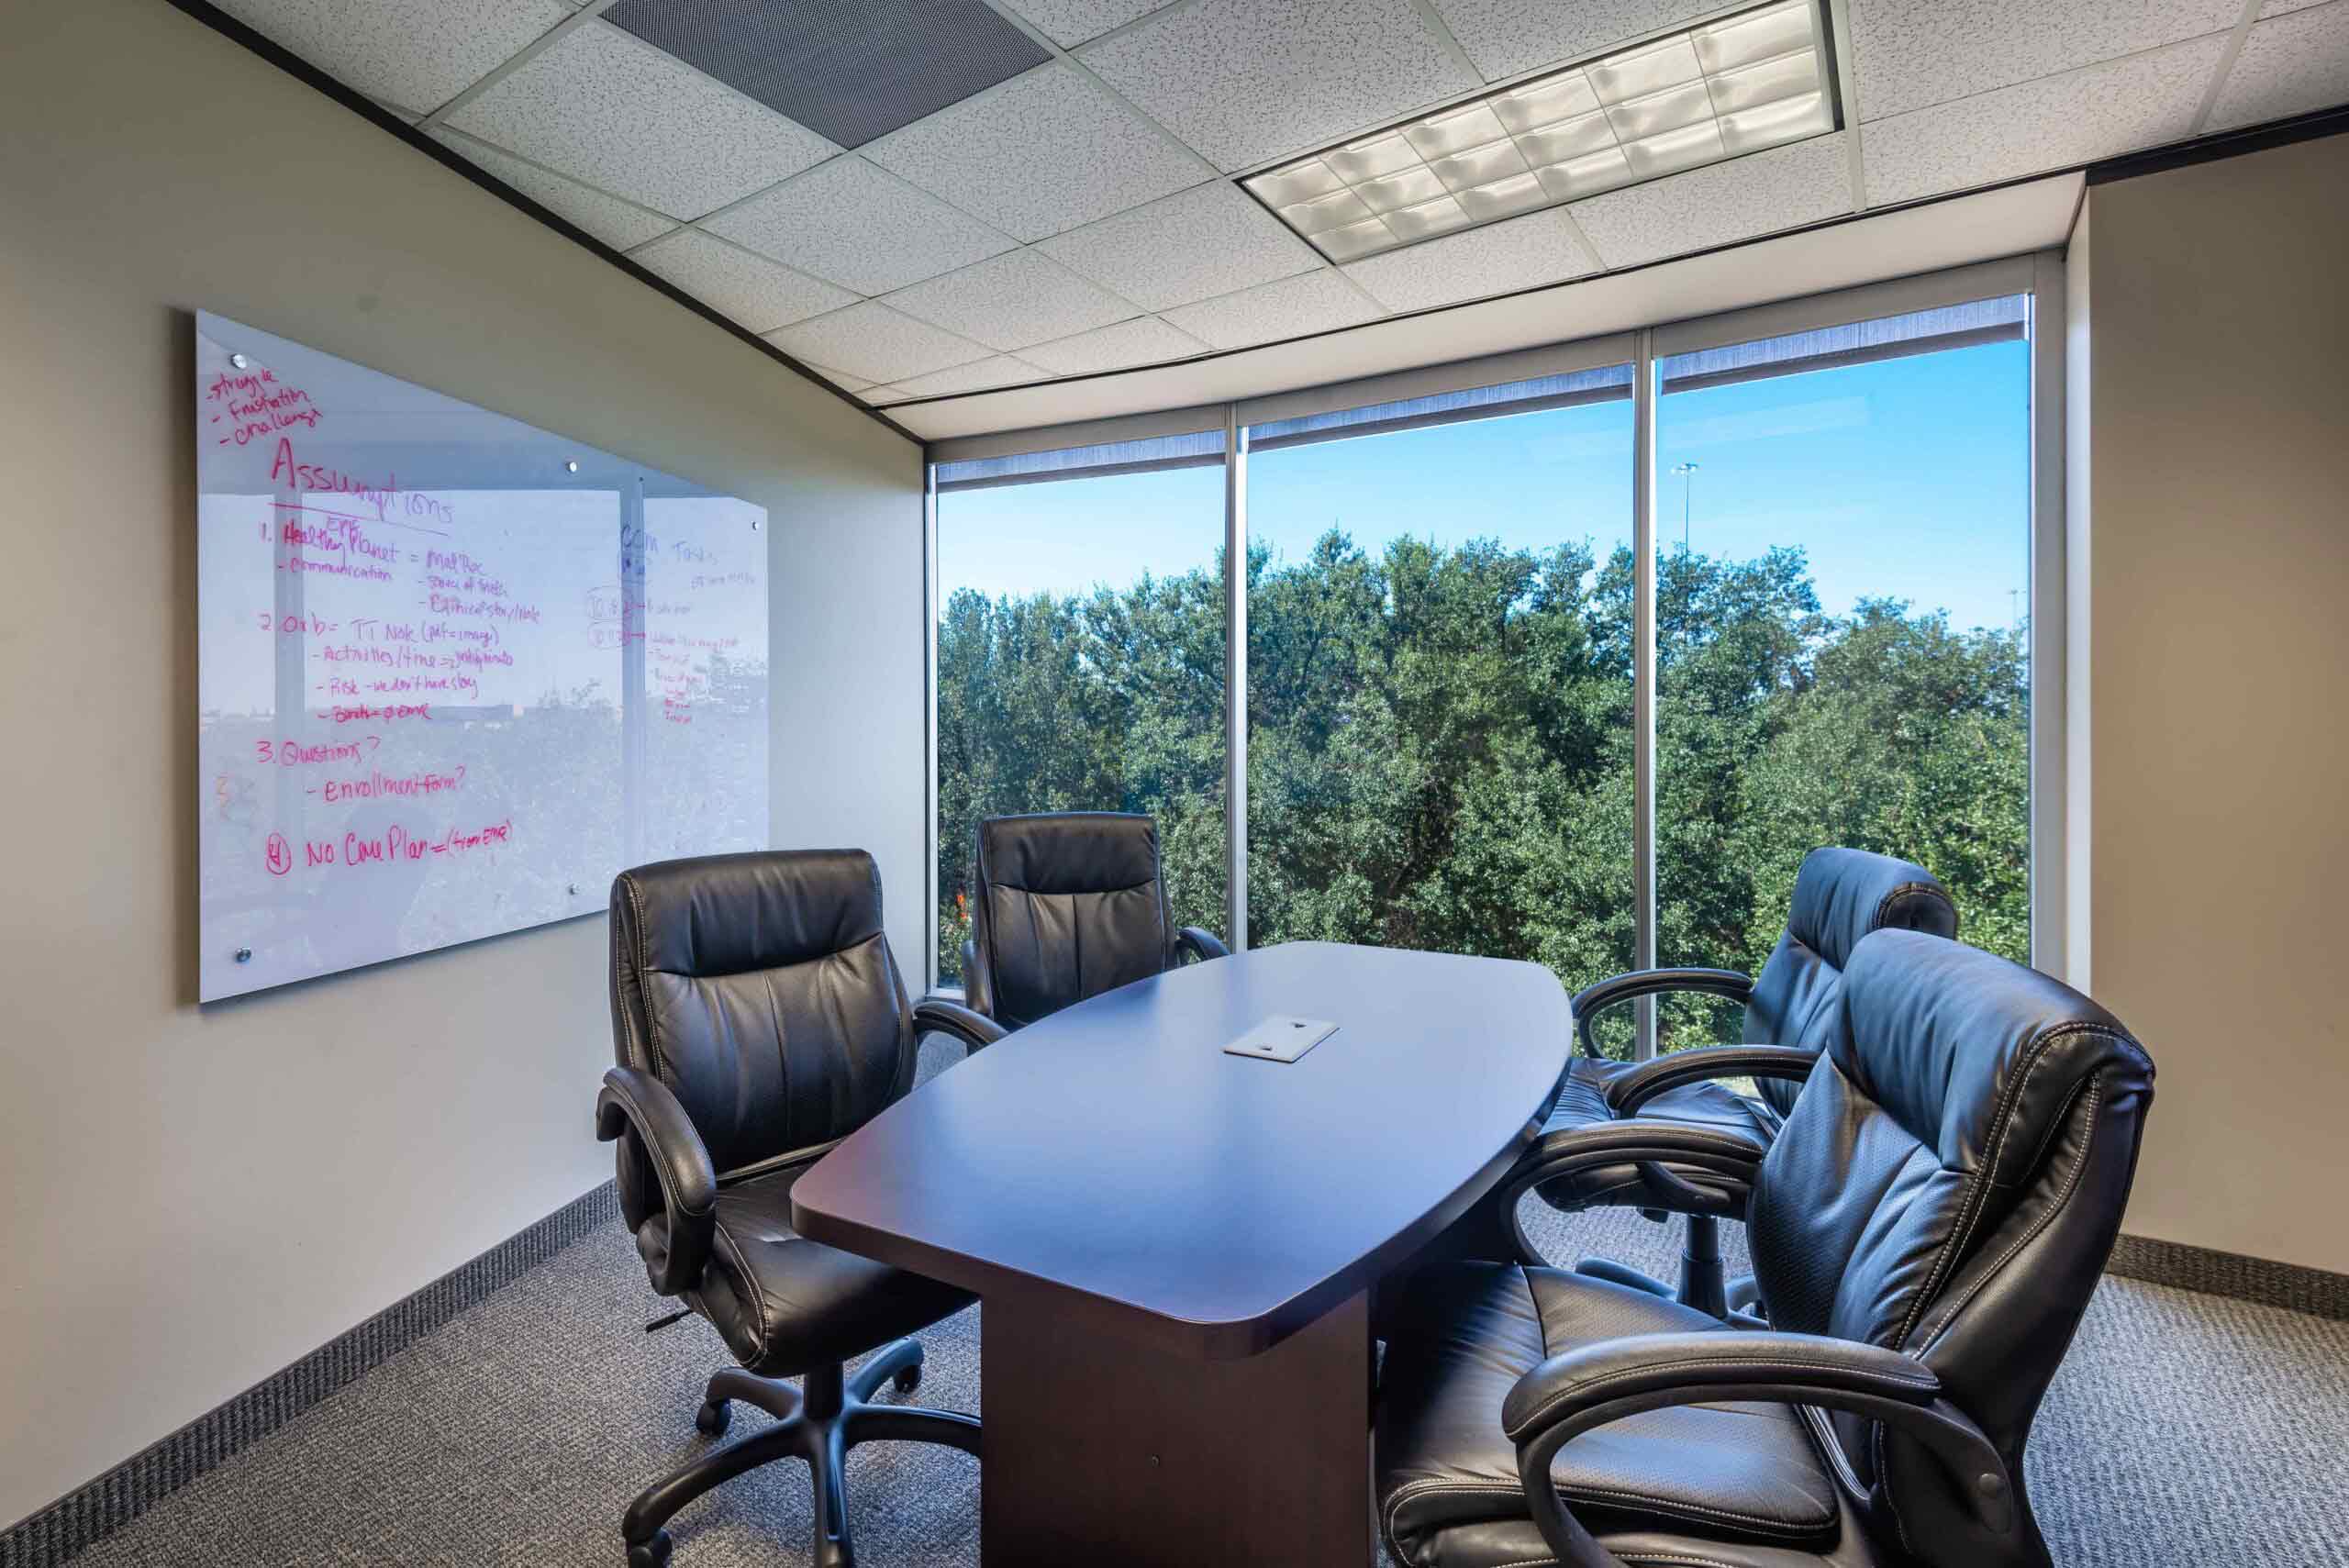 North Dallas meeting space with room to sit 4 people. Large floor to ceiling windows let in natural light.